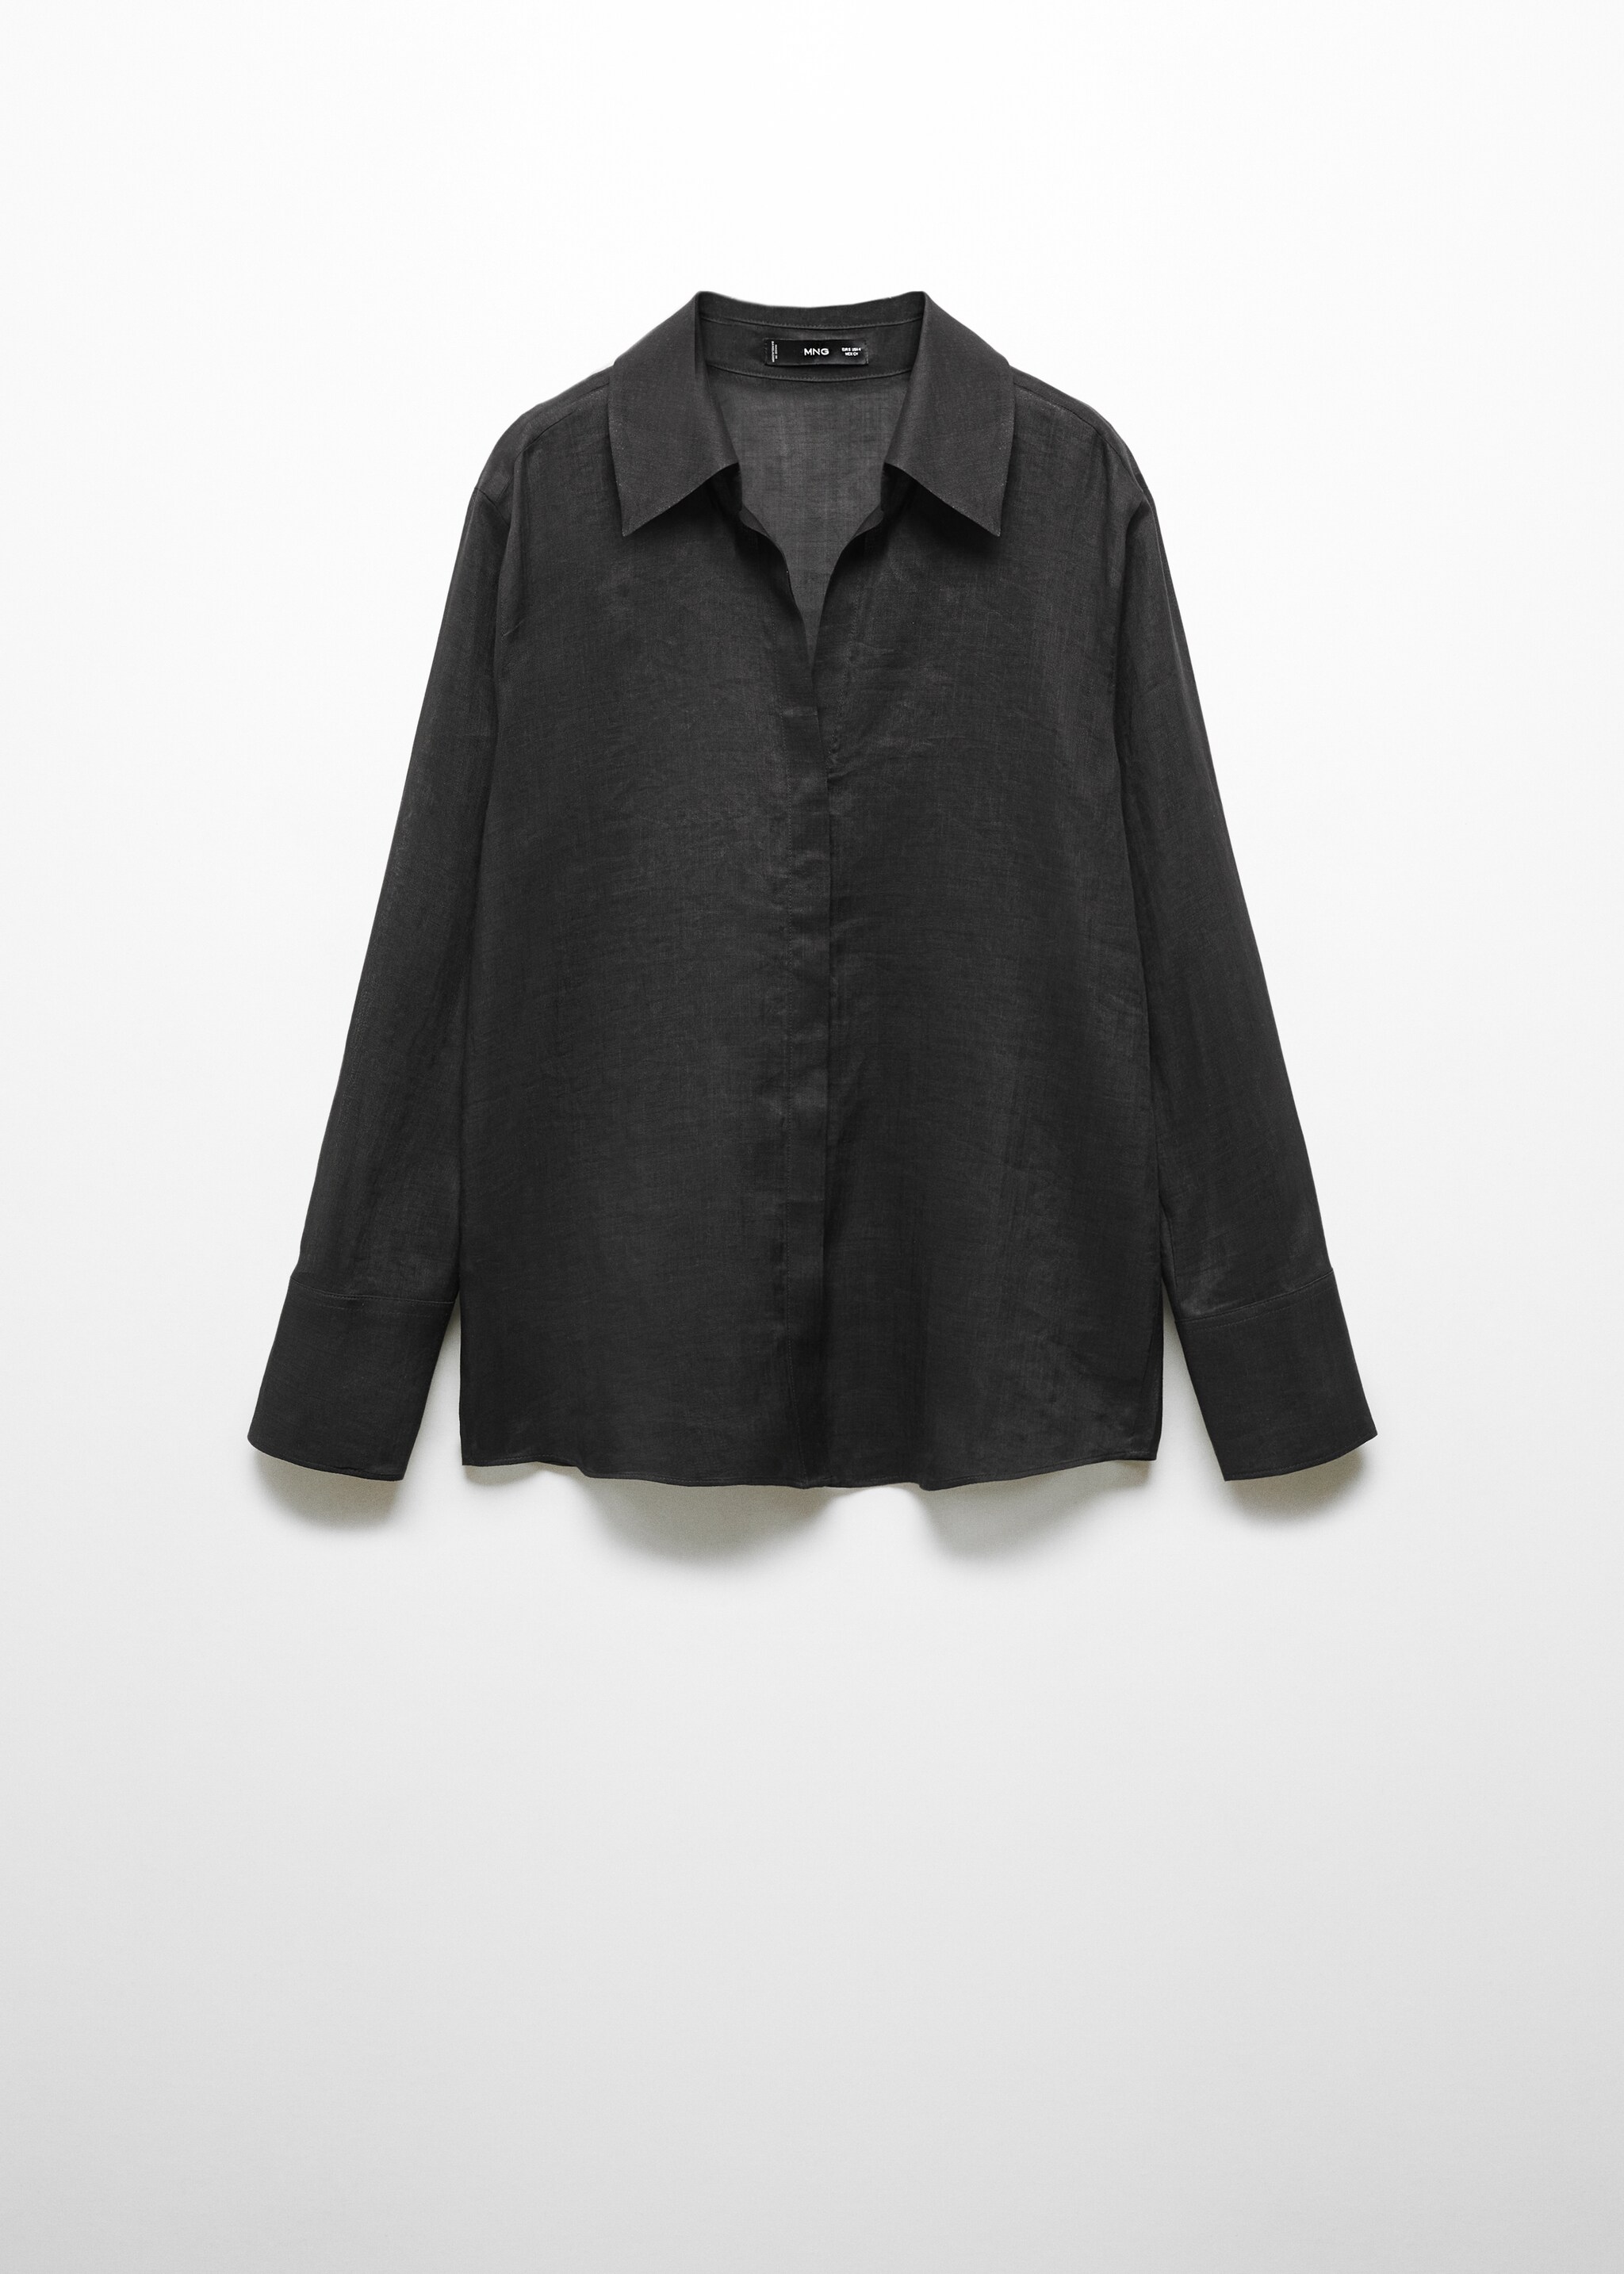 Ramie shirt with hidden buttons - Article without model